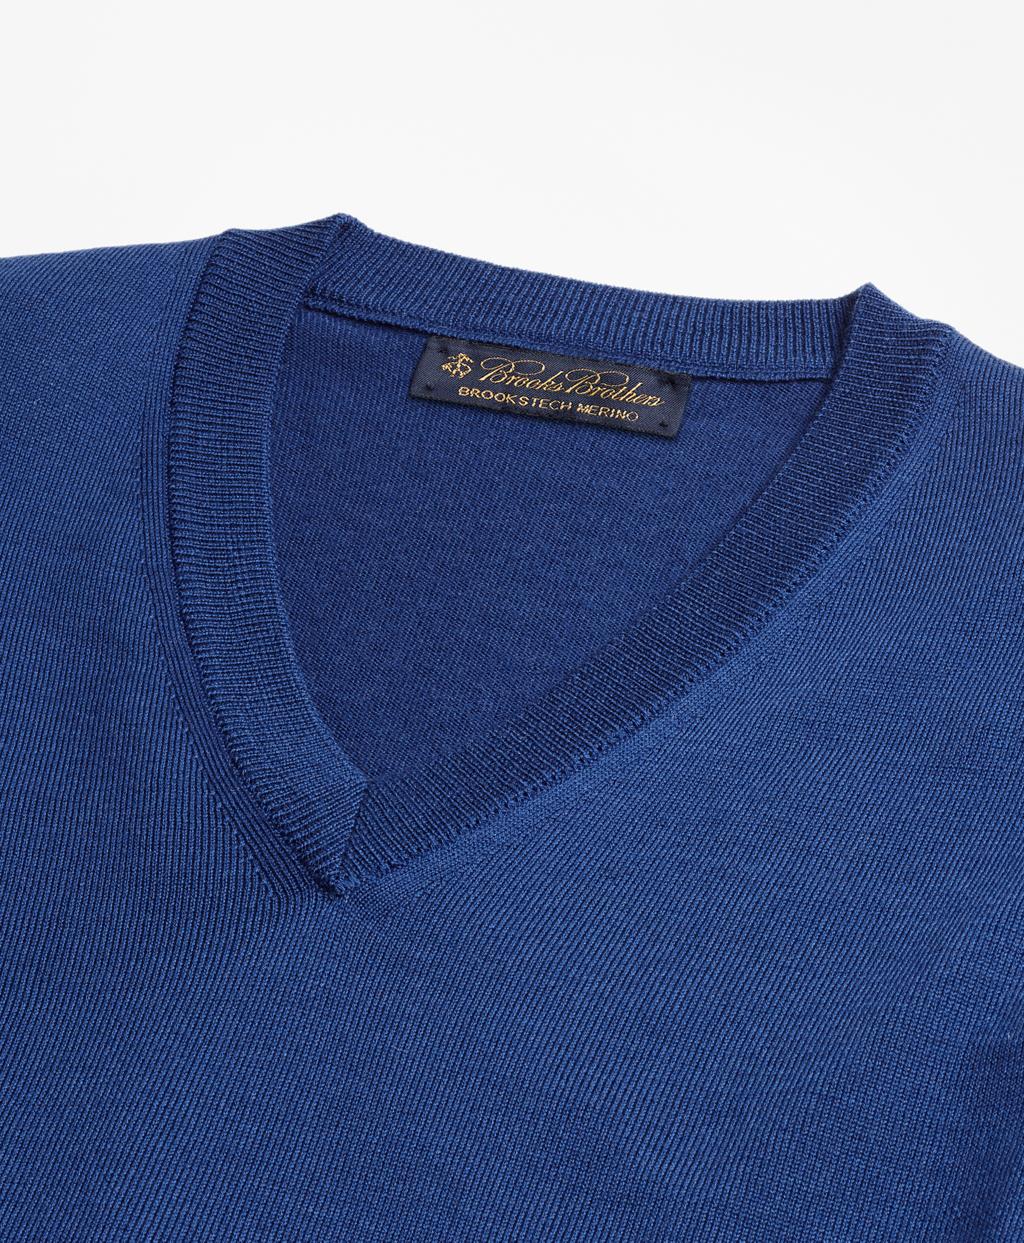 Lyst - Brooks Brothers Brookstech Merino Wool V-neck Sweater in Blue ...